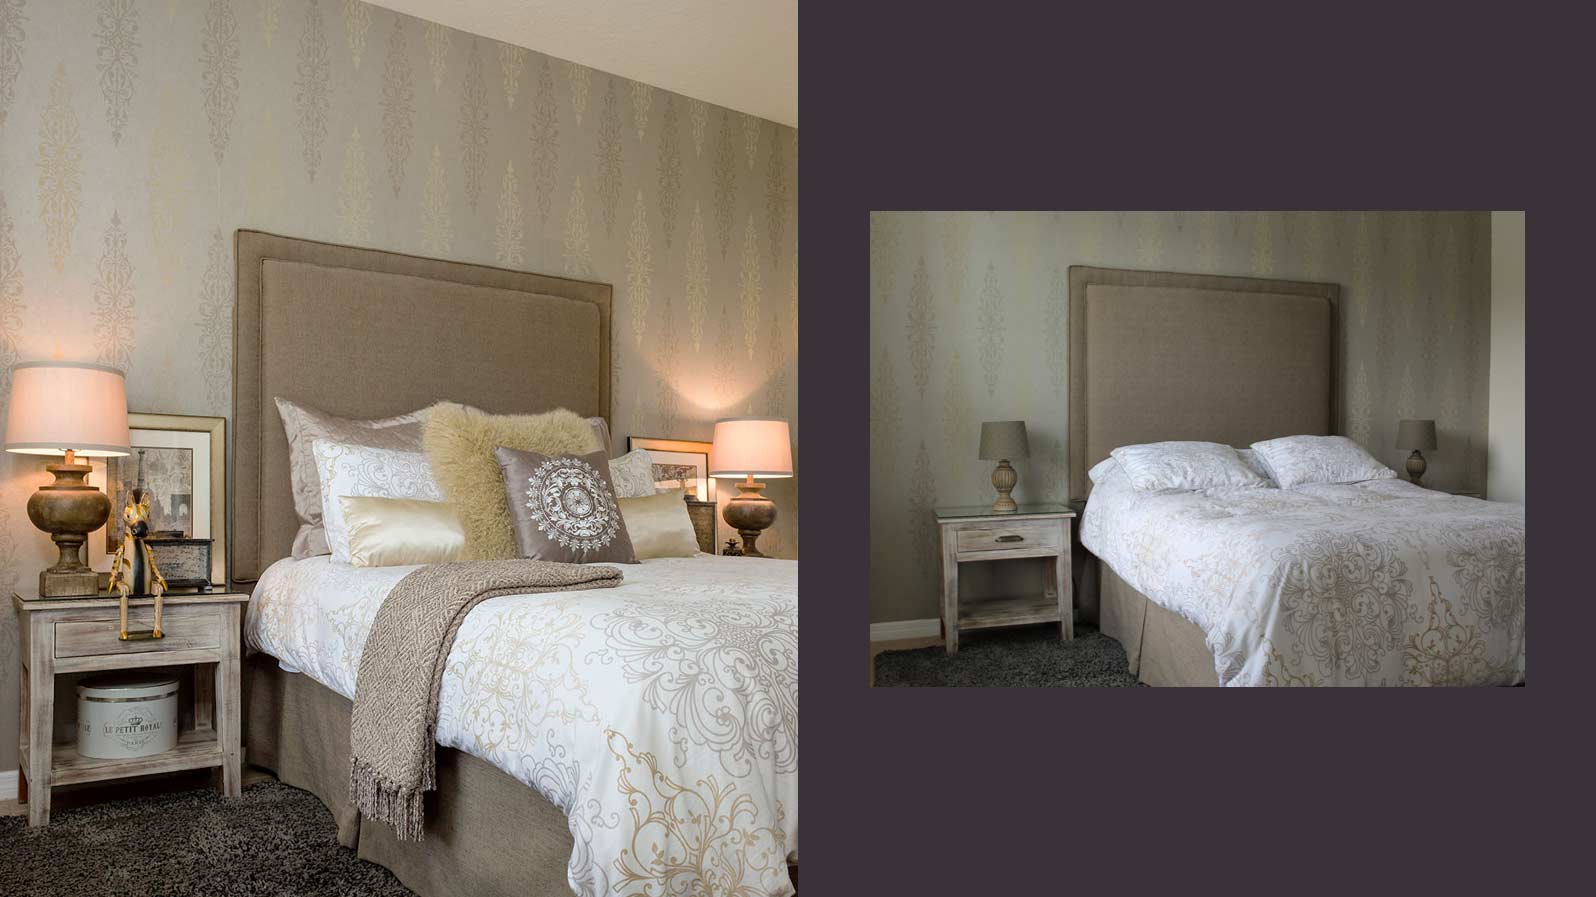 A before and after image of a bedroom, with and without accessories.